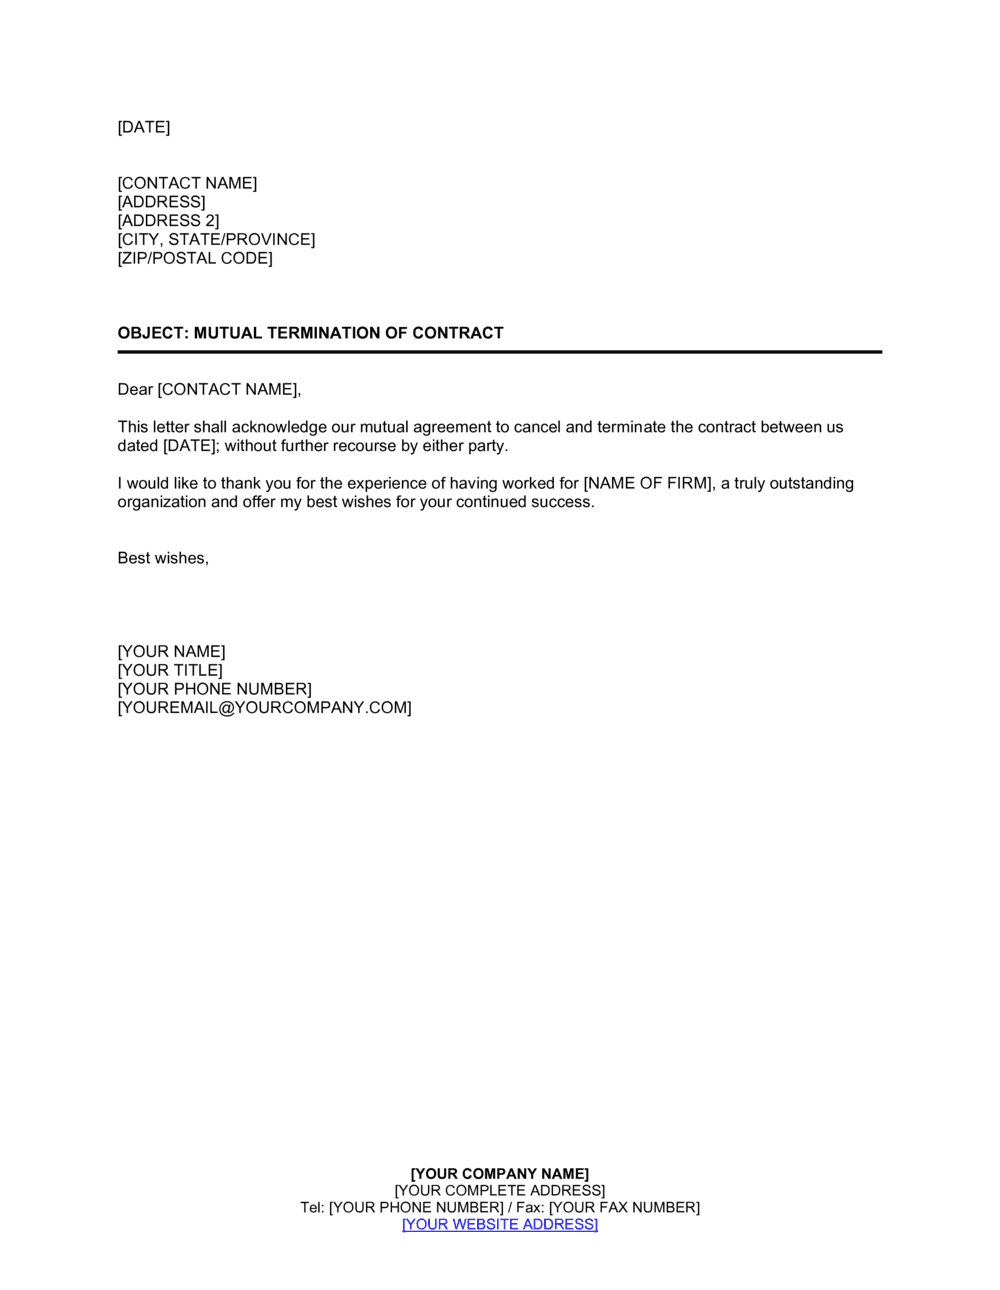 Service Contract Cancellation Letter from templates.business-in-a-box.com